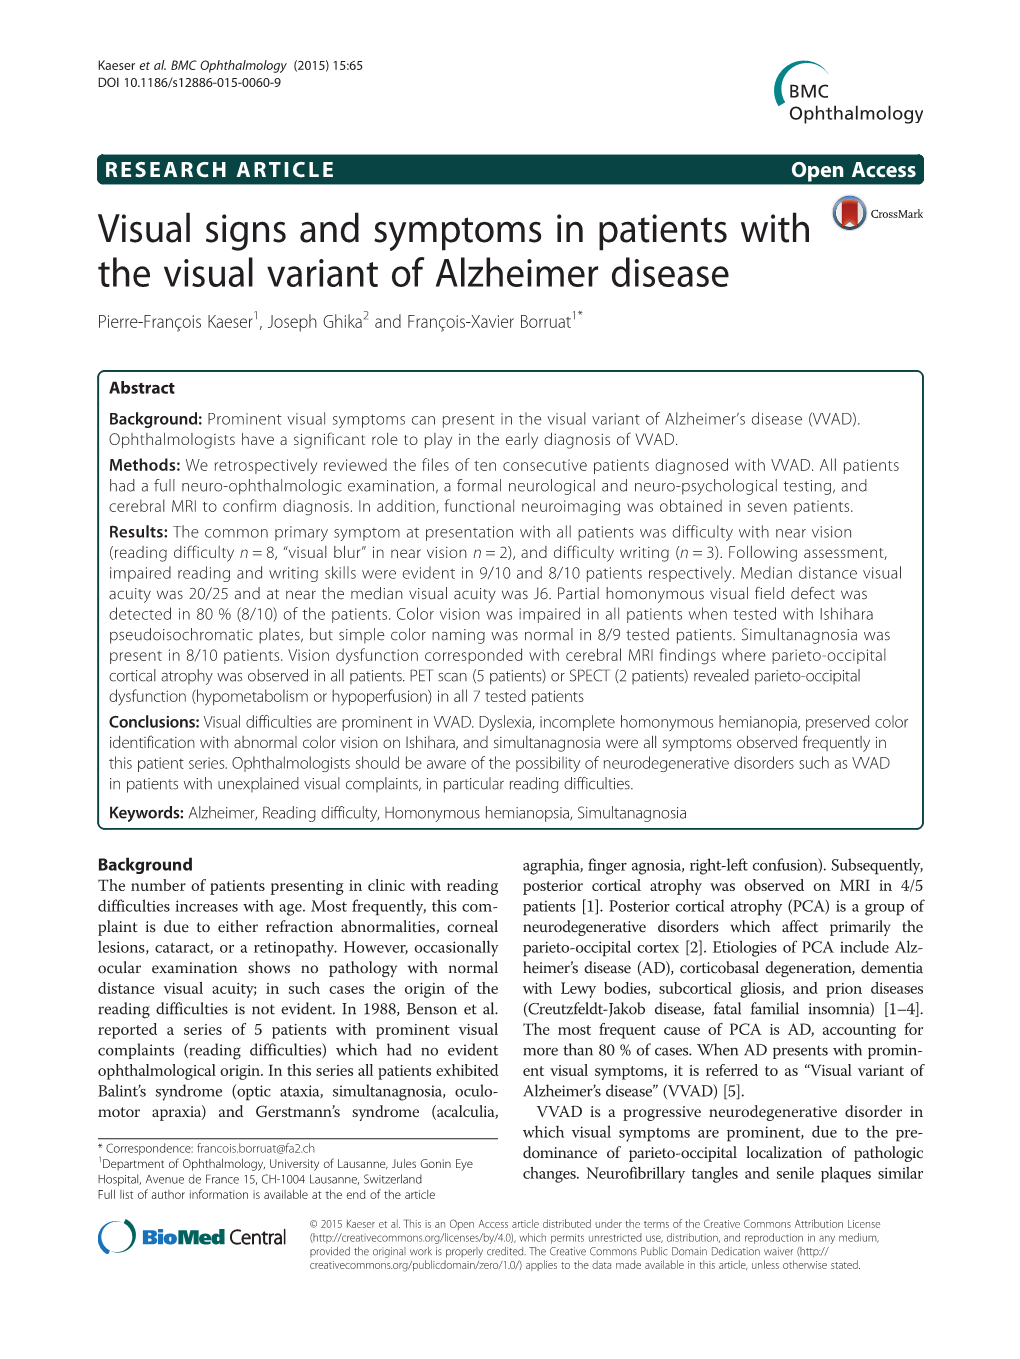 Visual Signs and Symptoms in Patients with the Visual Variant of Alzheimer Disease Pierre-François Kaeser1, Joseph Ghika2 and François-Xavier Borruat1*